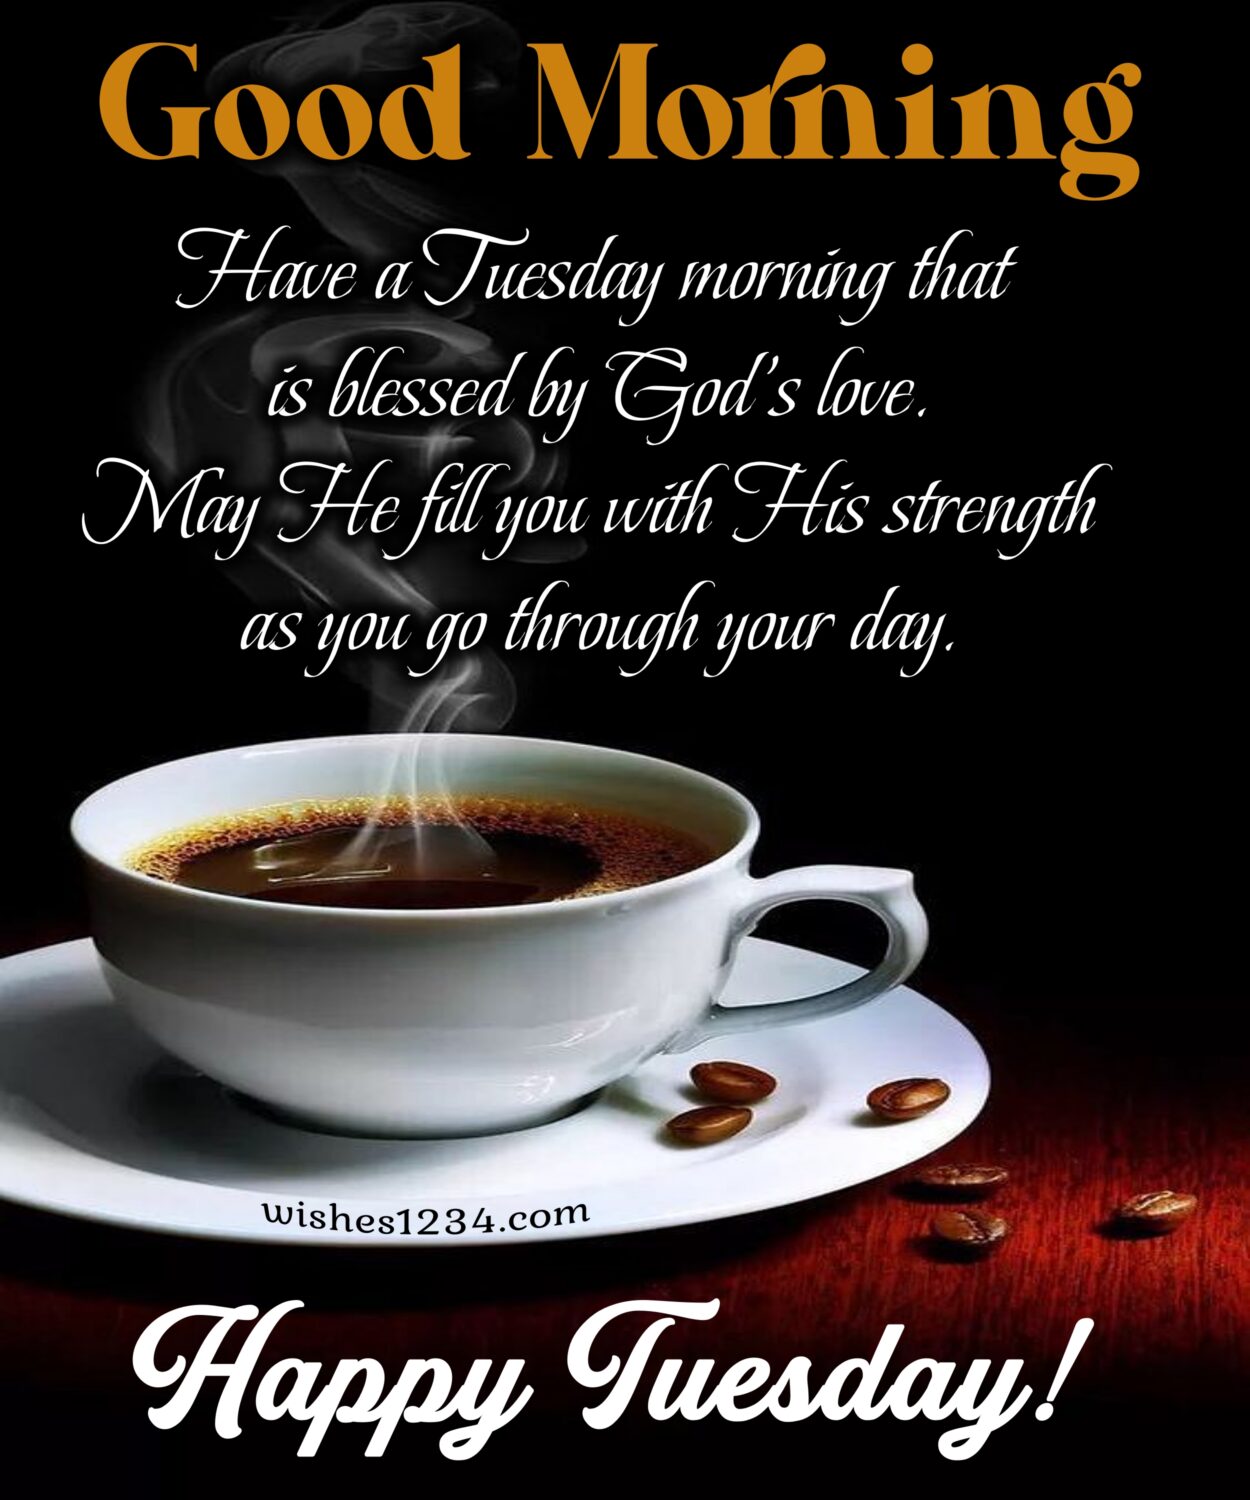 Happy Tuesday with white cup with black coffee, Good Morning Tuesday.